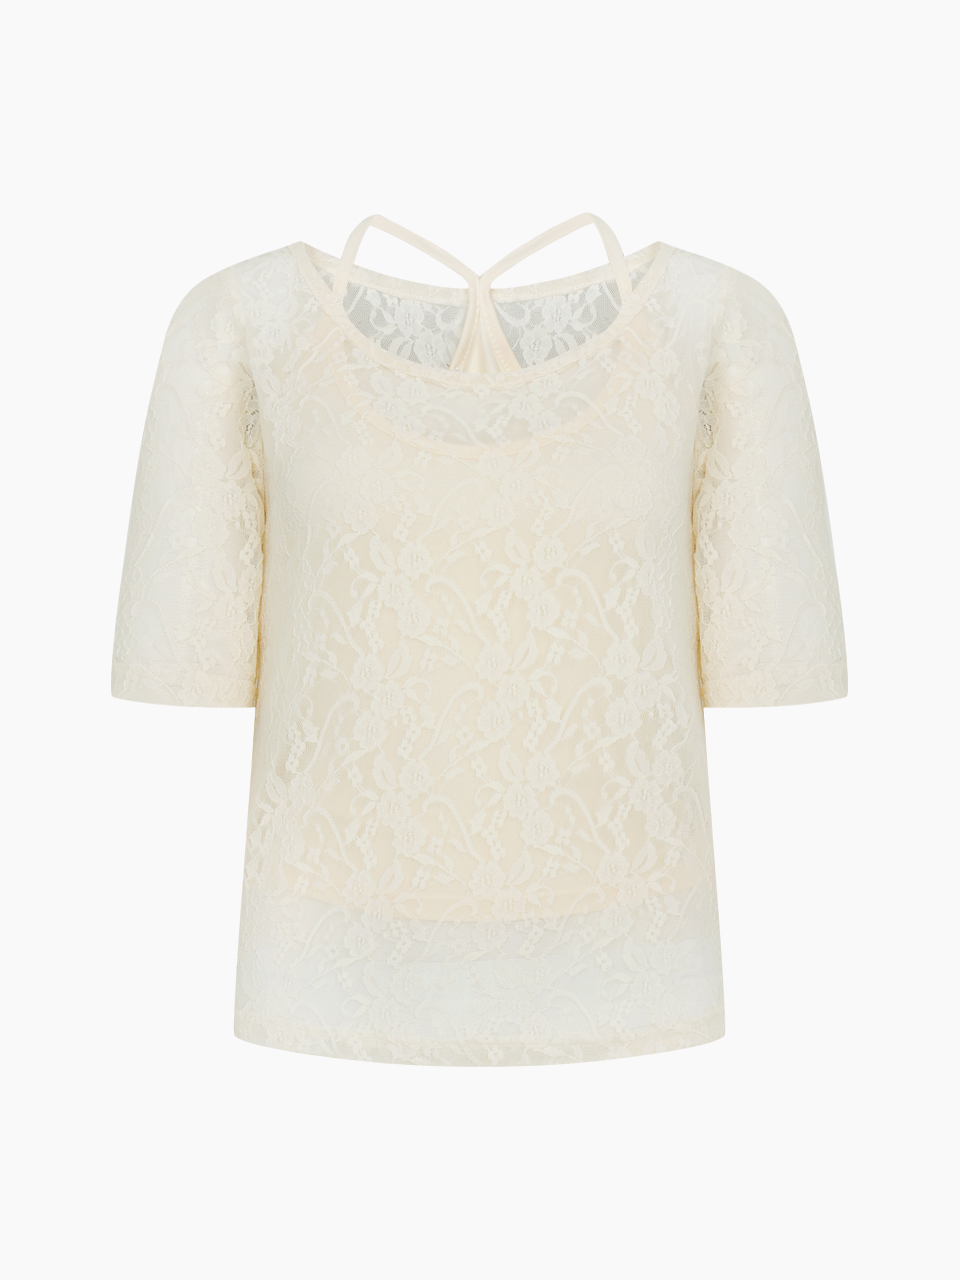 layered lace top - cream ivory